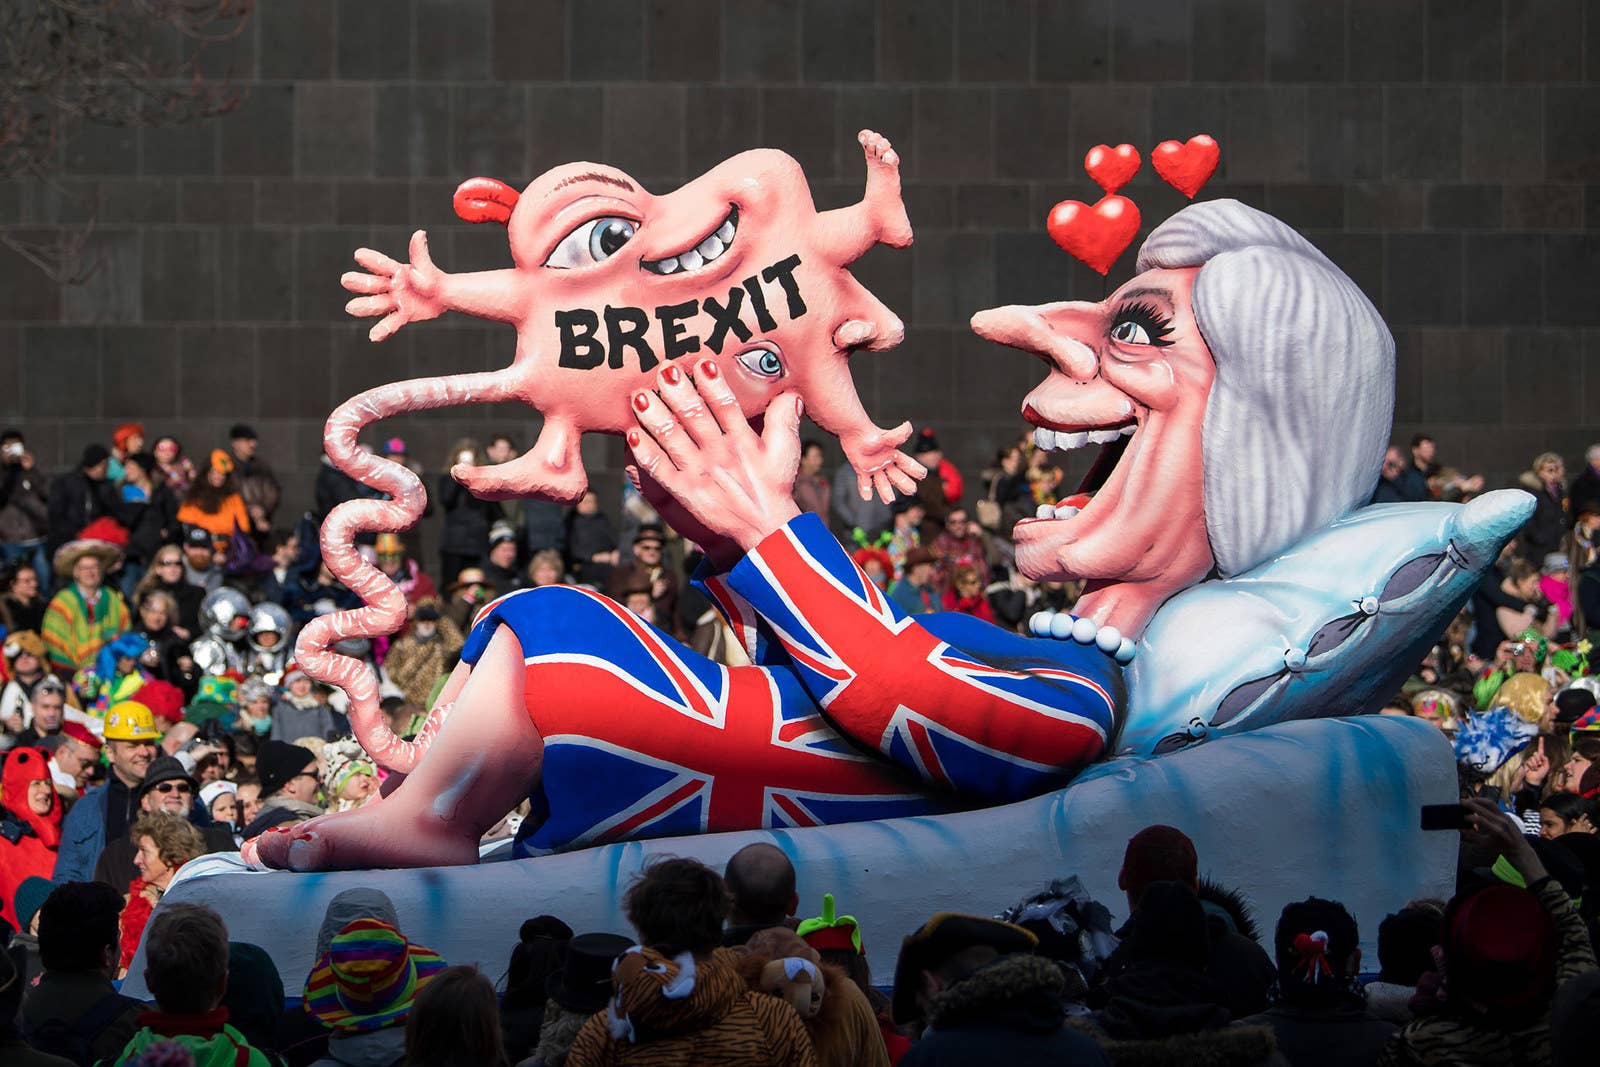 A float mocking Prime Minister Theresa May rolls past spectators during the annual Rose Monday parade on Feb. 12, in Dusseldorf, Germany. Political satire is a traditional cornerstone of the annual parades.